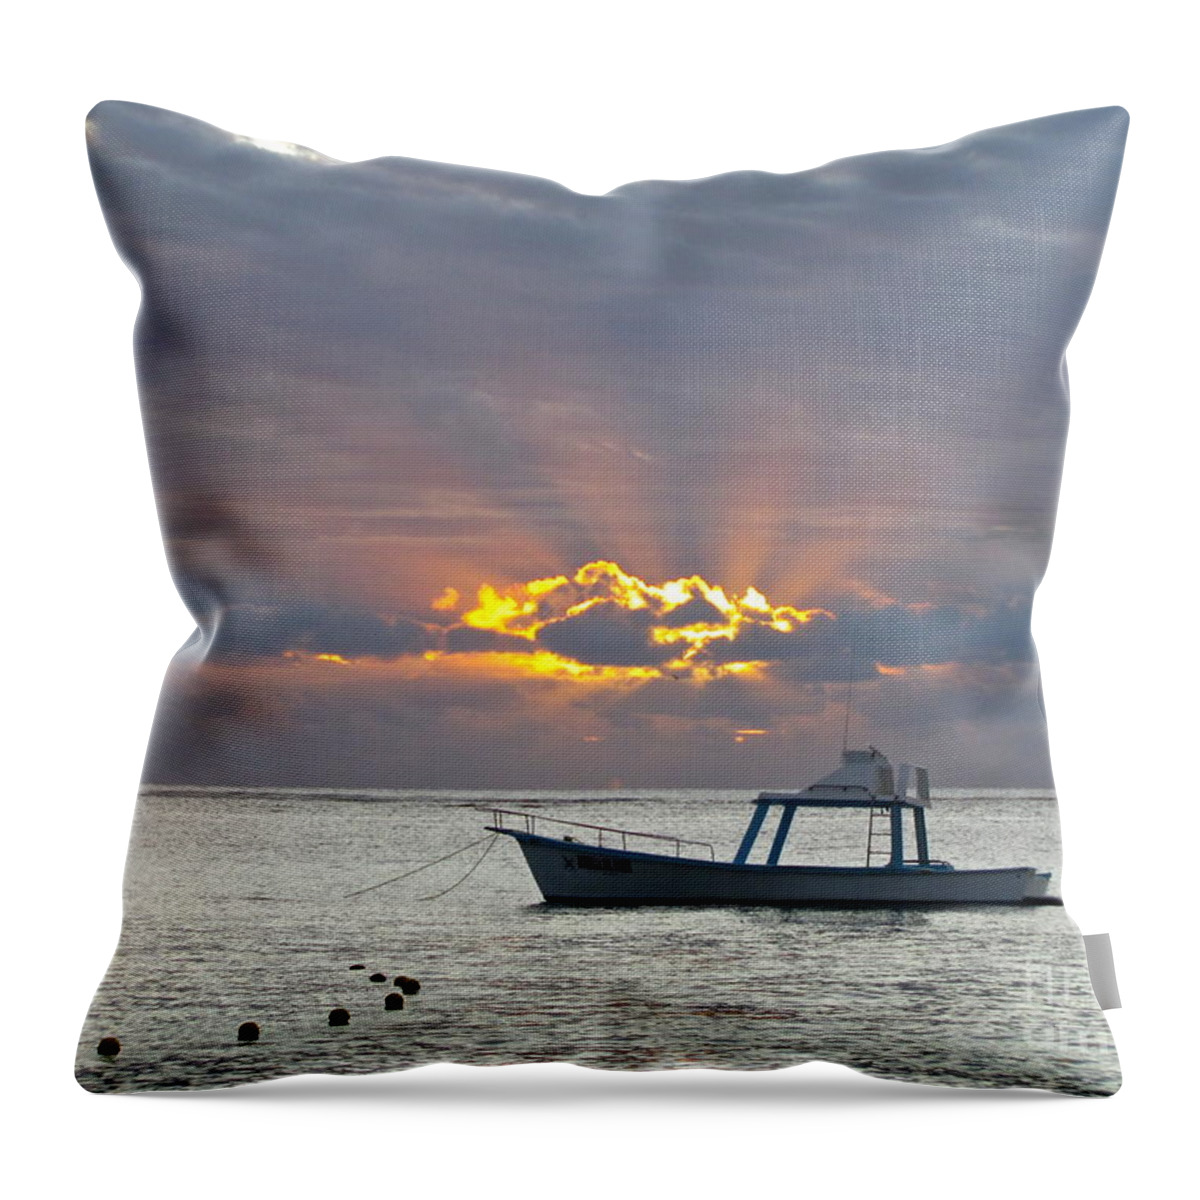 Photography Throw Pillow featuring the photograph Sunrise - Puerto Morelos by Sean Griffin